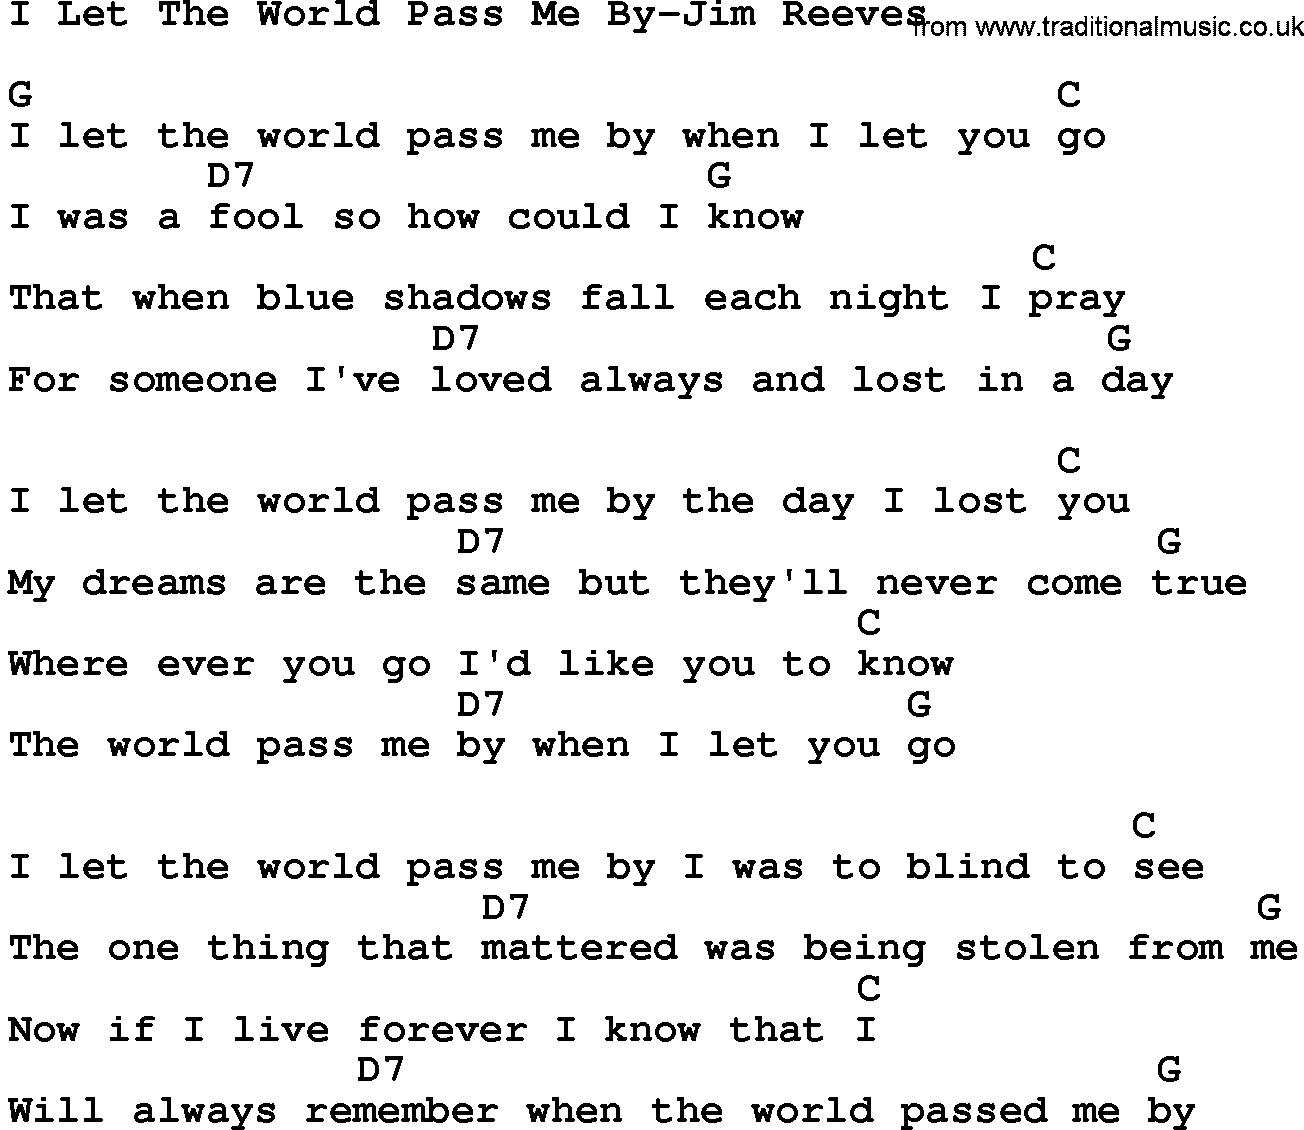 Country music song: I Let The World Pass Me By-Jim Reeves lyrics and chords